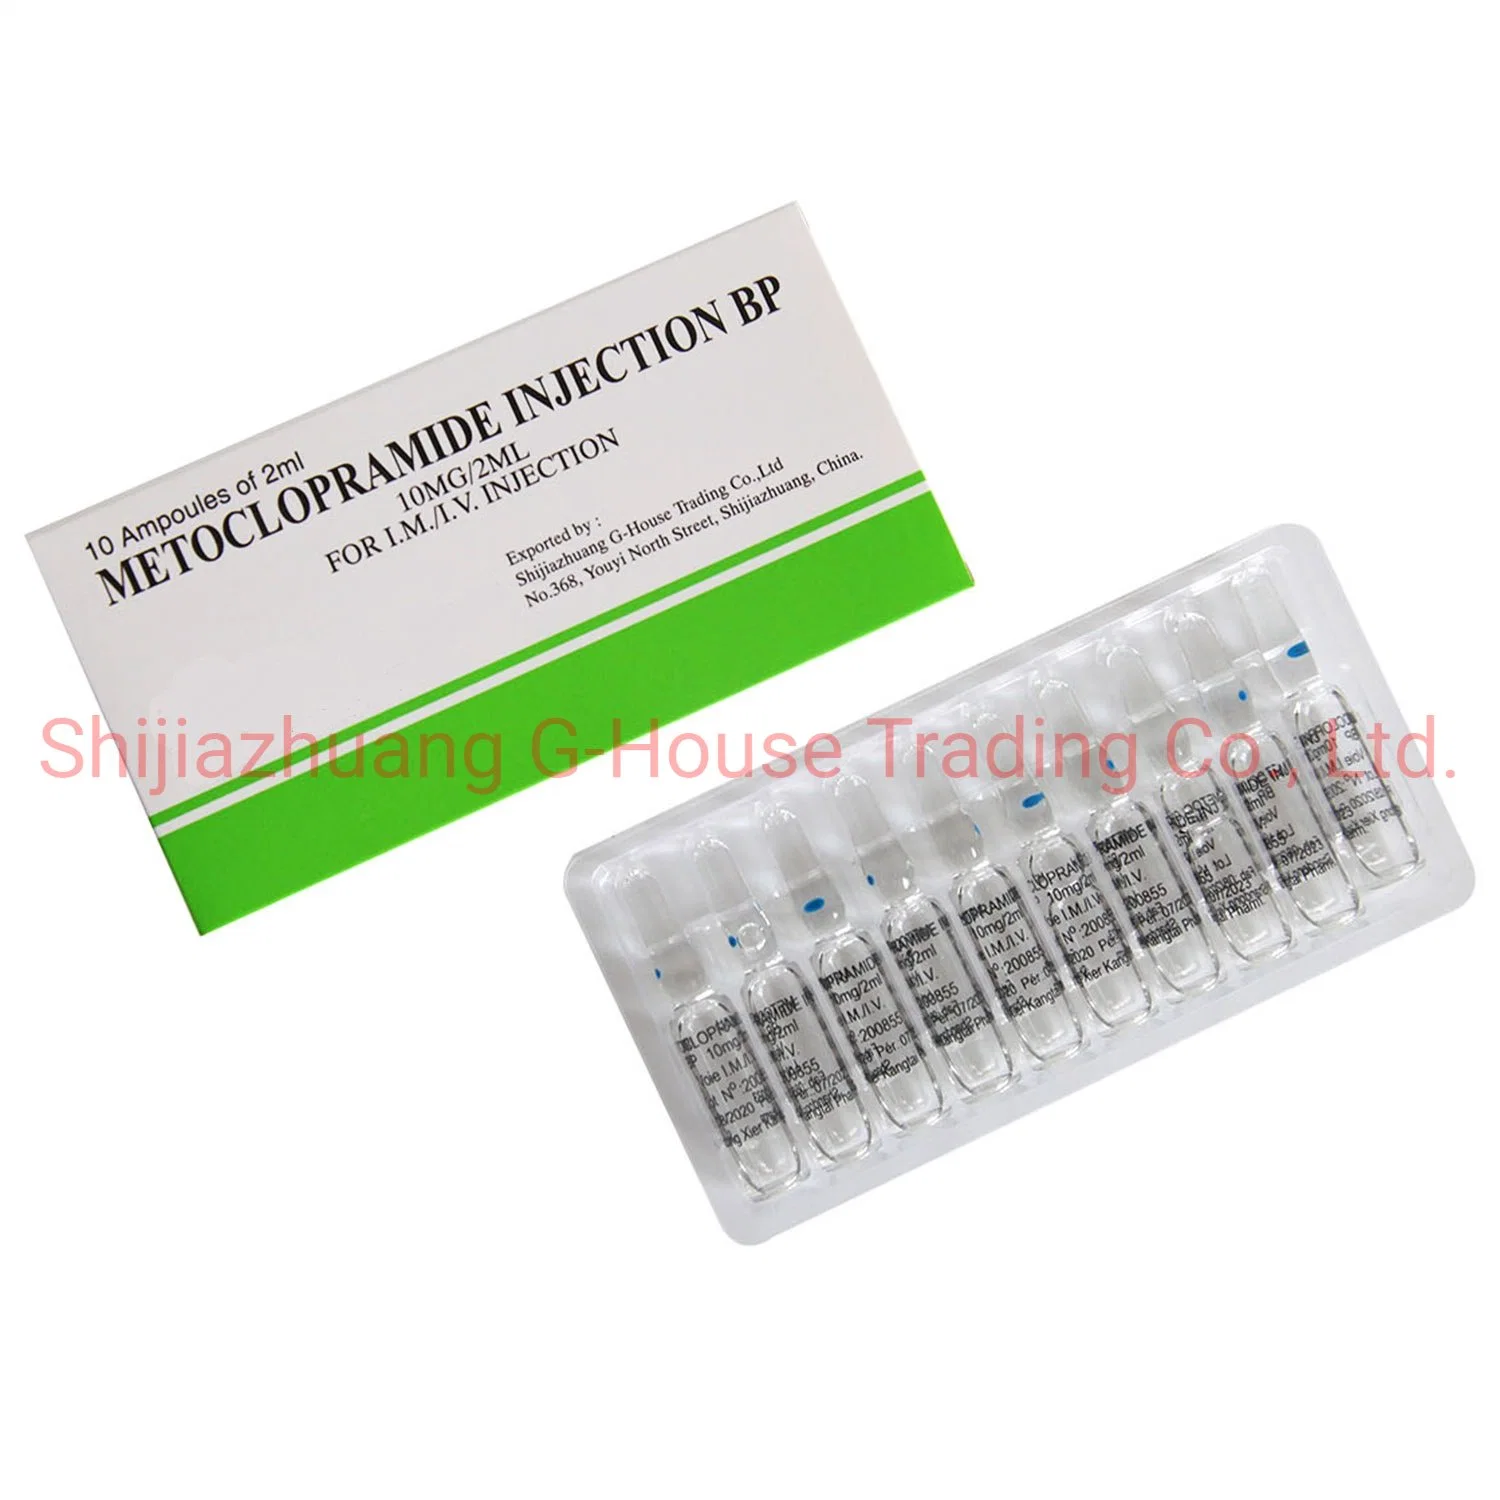 Metoclopramide Injection Finished Medicine Pharmaceutical